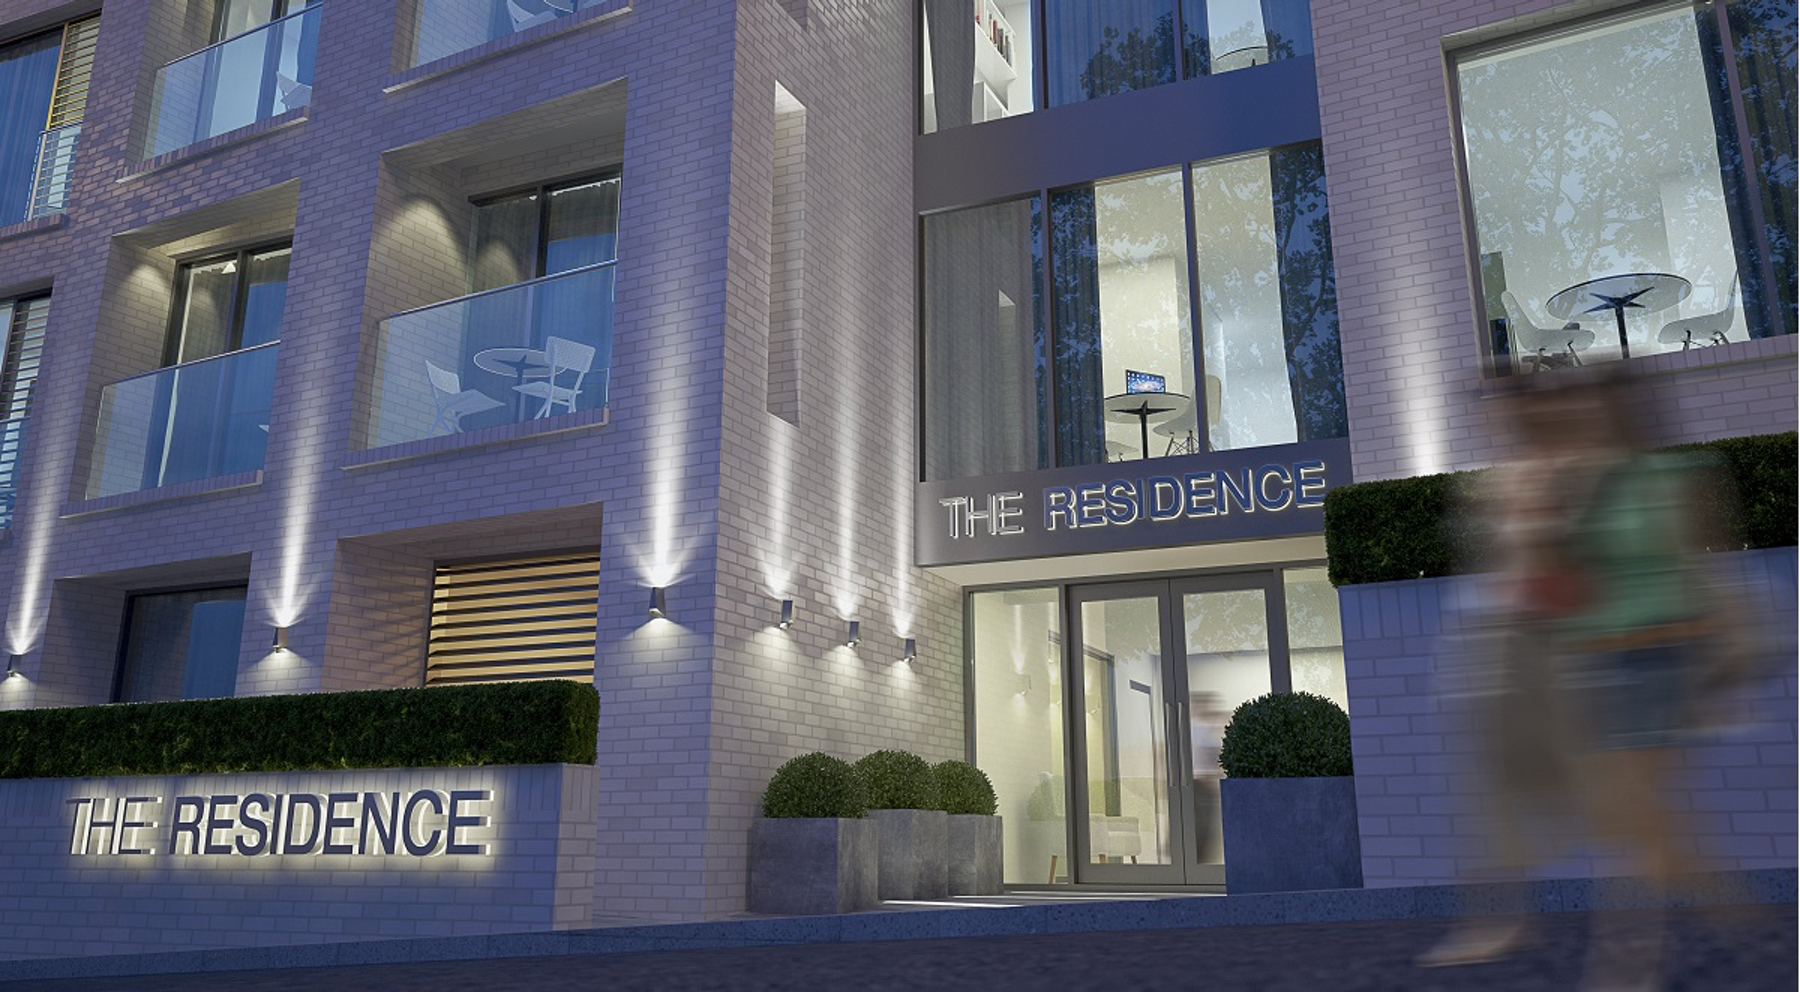 Elegant new property to be introduced by Prestige Student Living